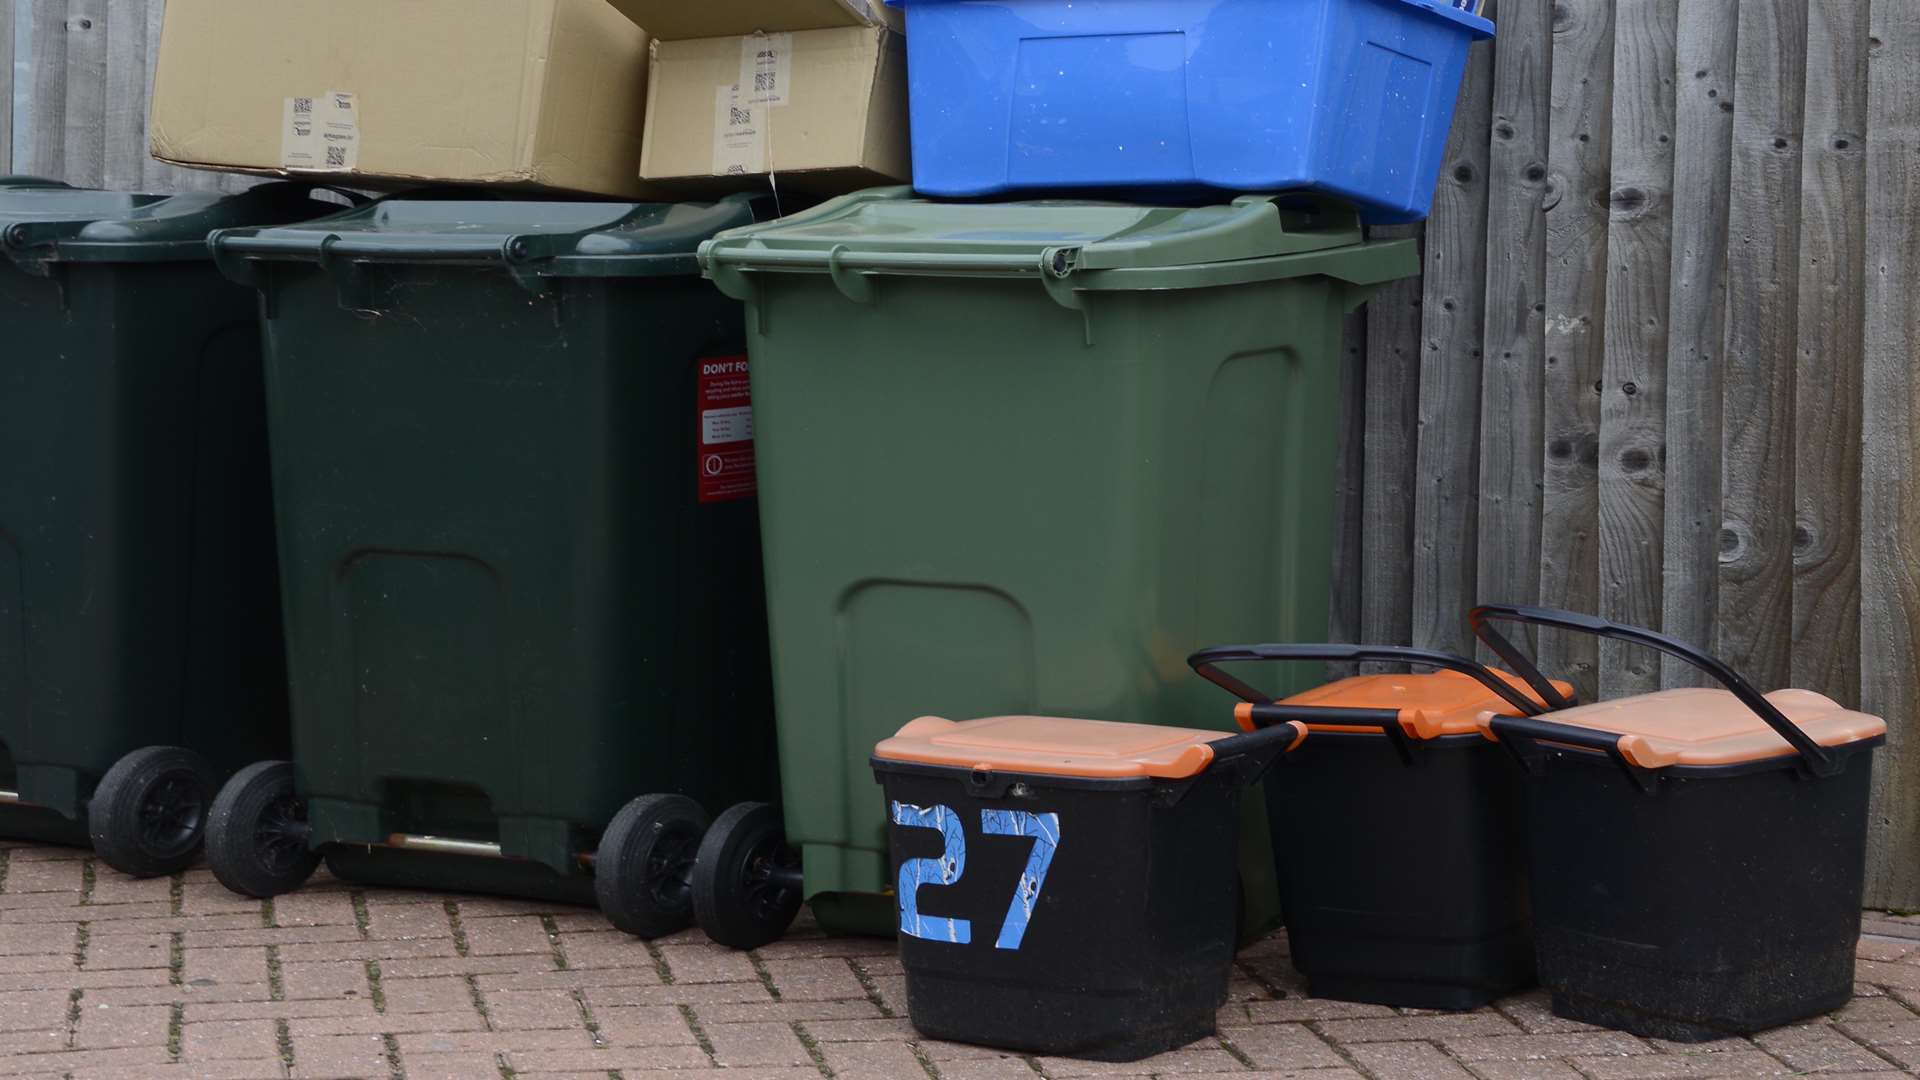 Labels were placed on the bins explaining why they weren't collected